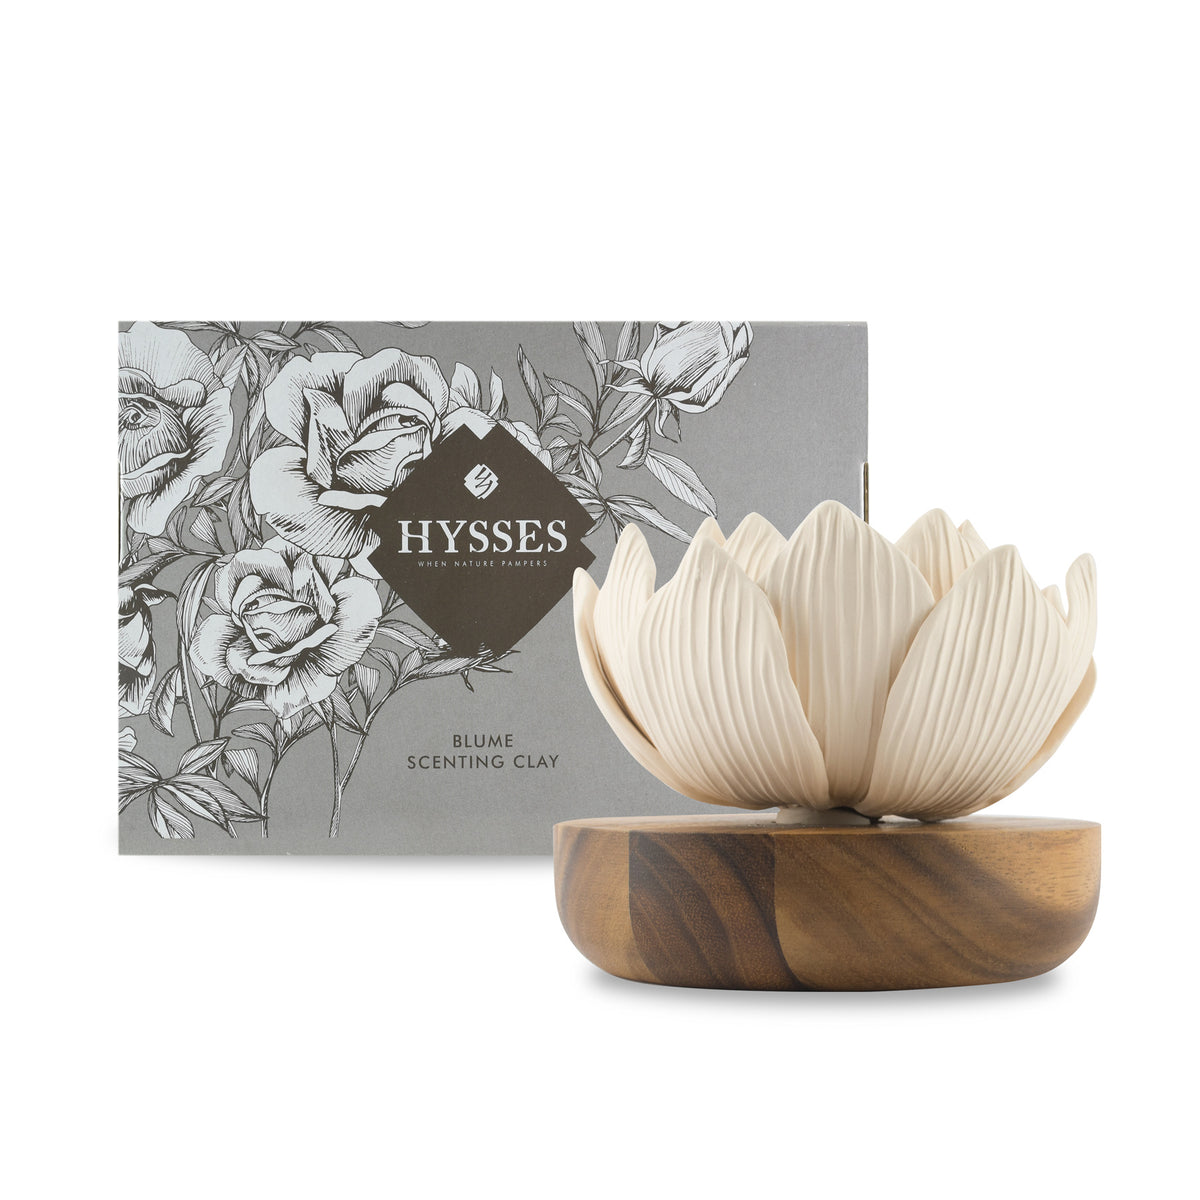 Blume Scenting Clay Lotus - HYSSES